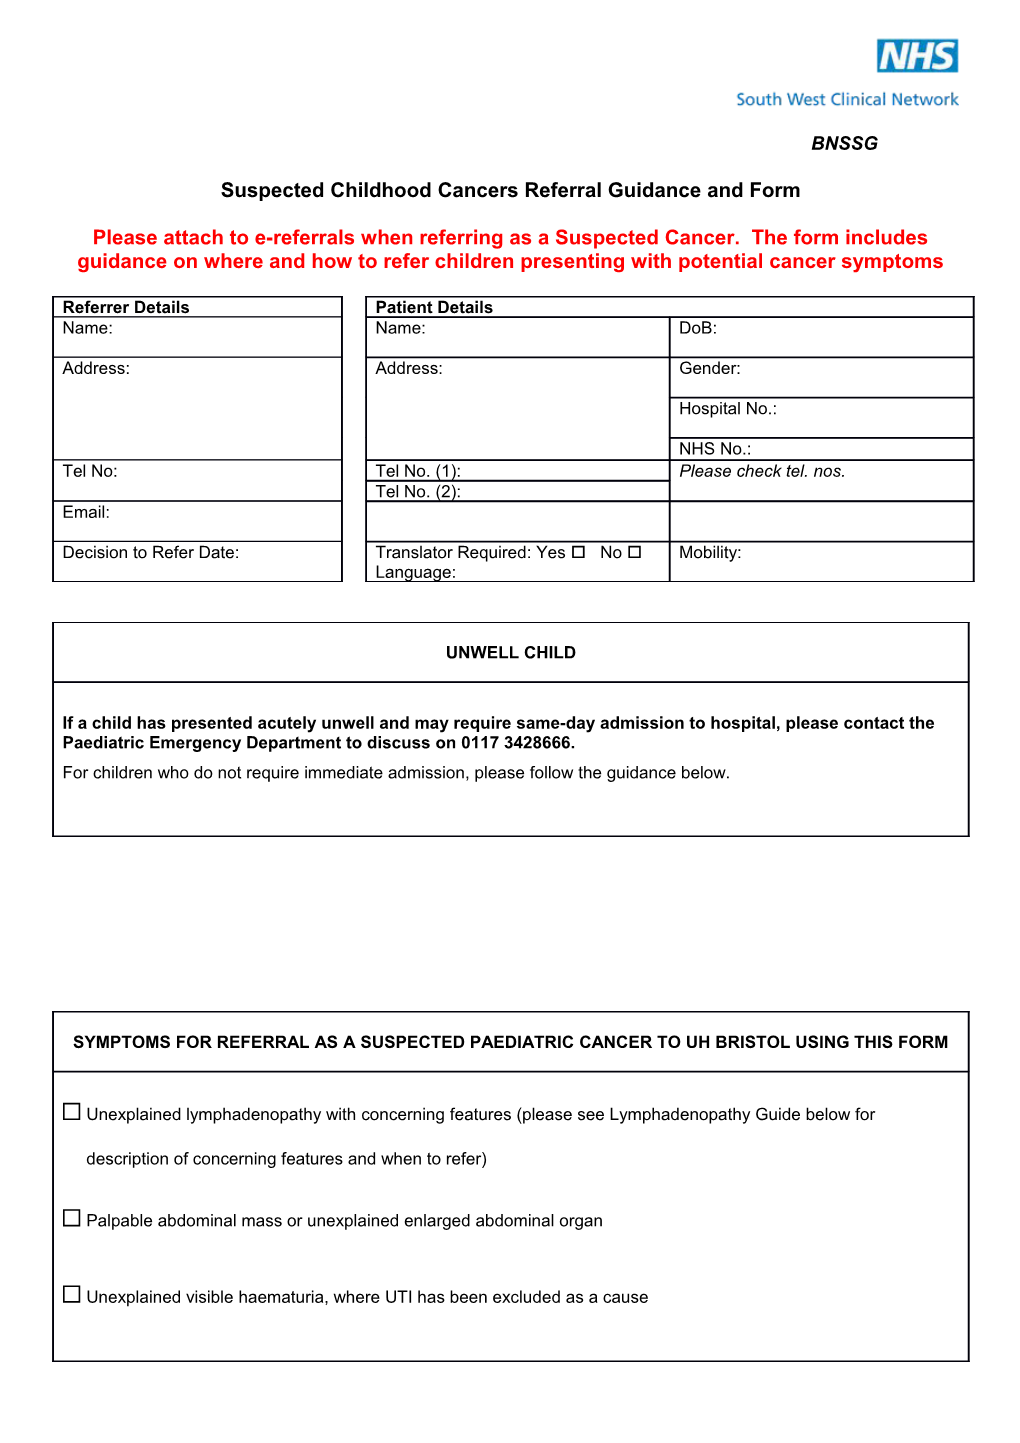 Suspected Childhood Cancers Referral Guidanceand Form